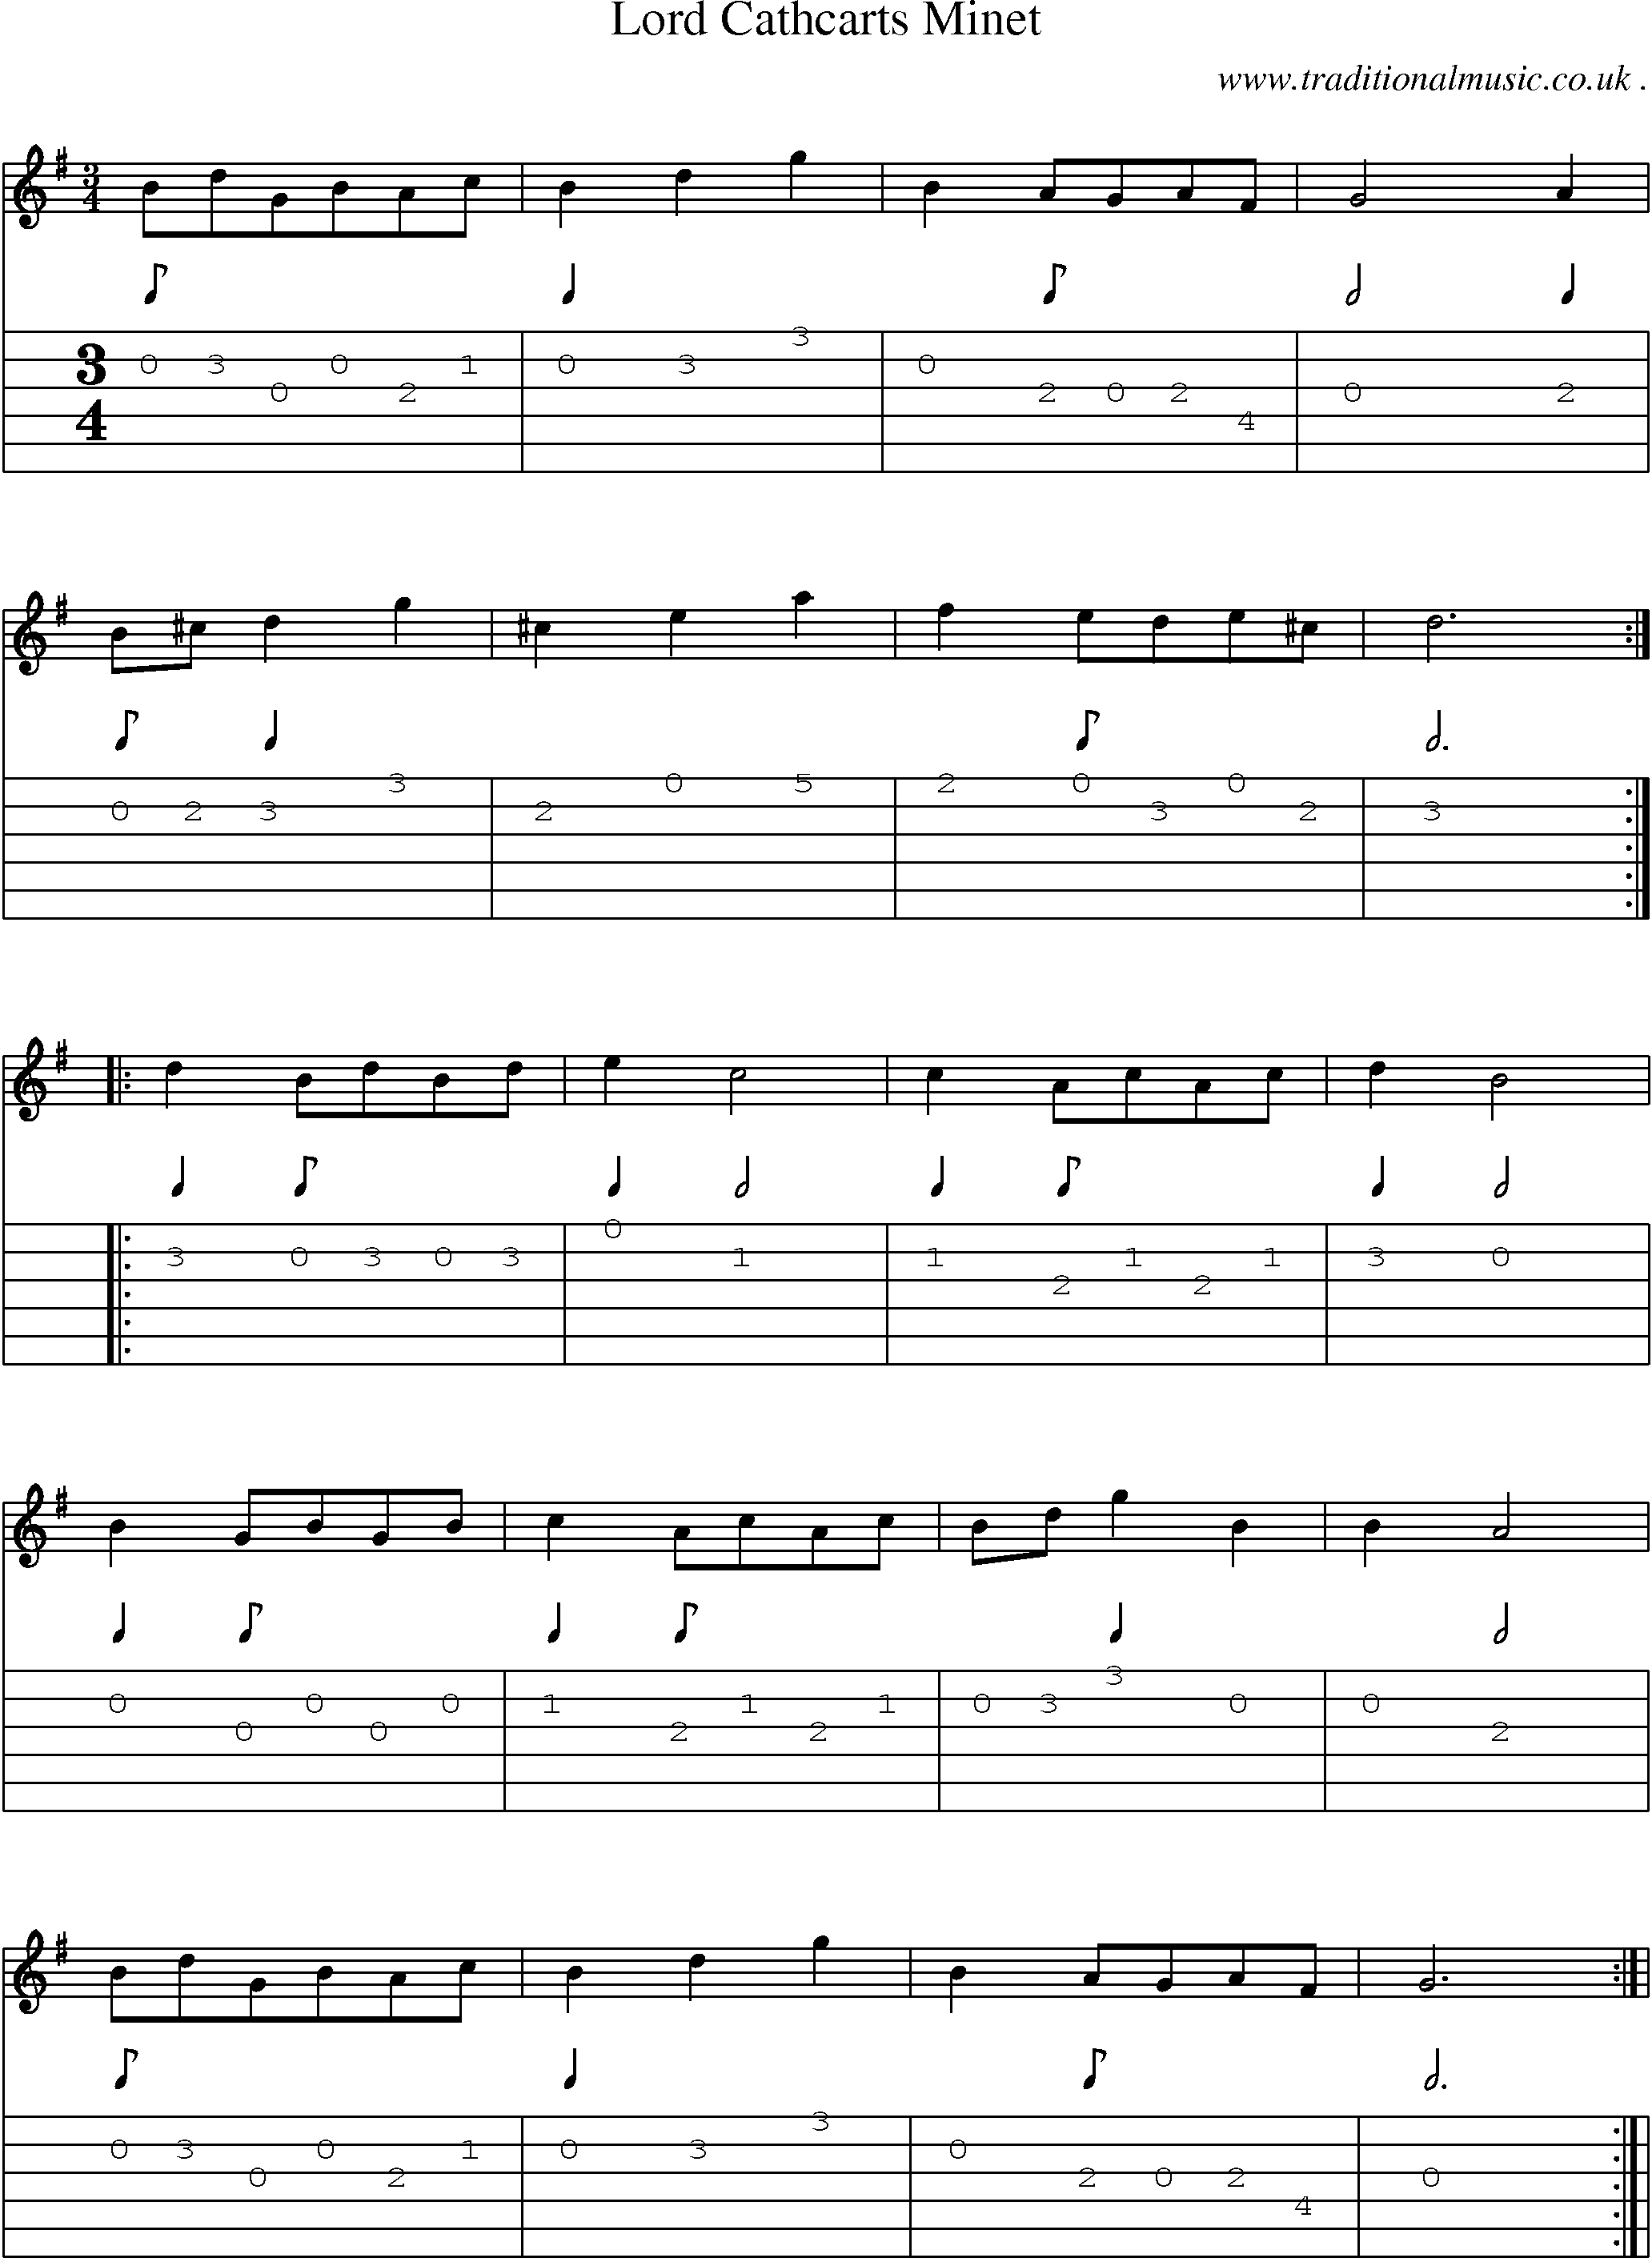 Sheet-Music and Guitar Tabs for Lord Cathcarts Minet